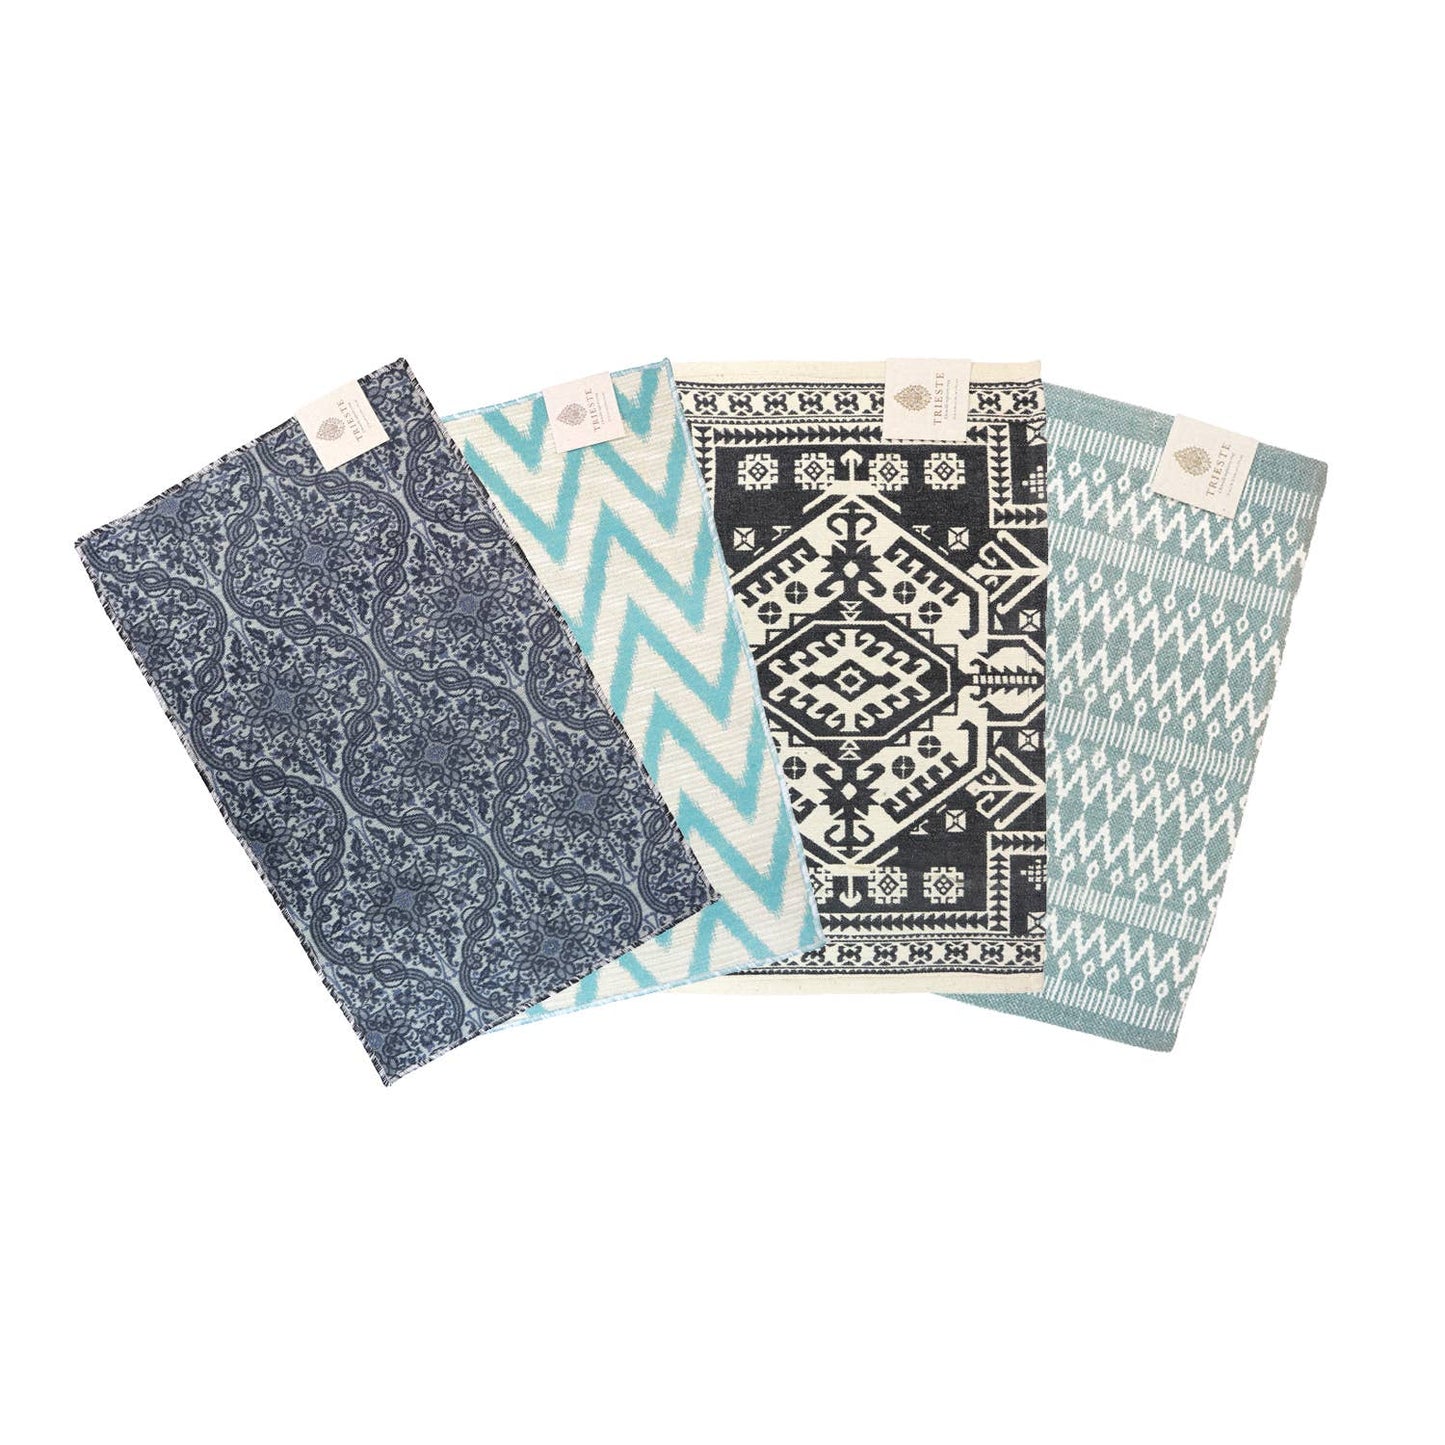 Trieste Area Rugs - Size Options - Cotton - Assorted Styles